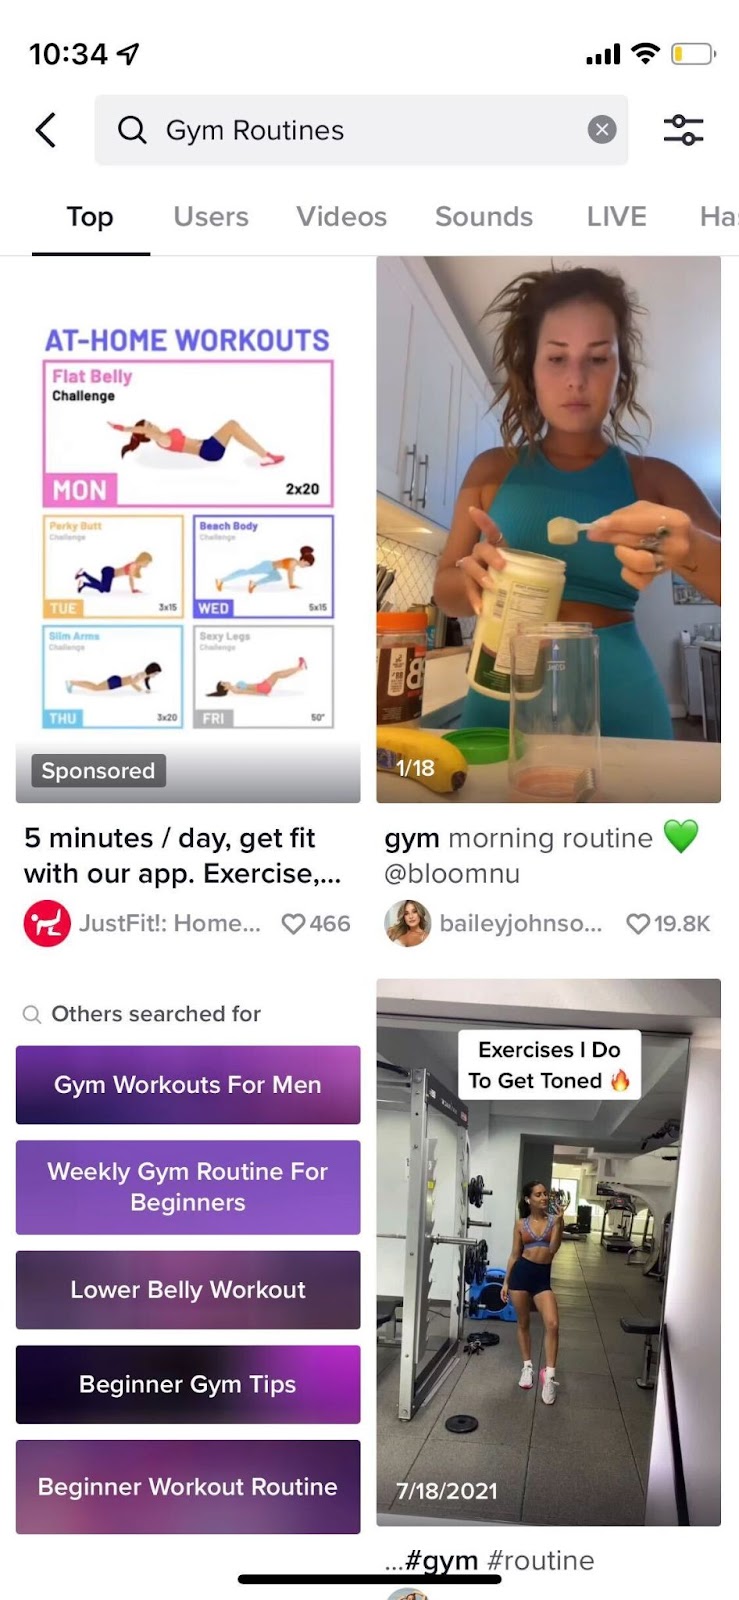 Screenshot of TikTok search results for "Gym Routines," which includes a sponsored result.